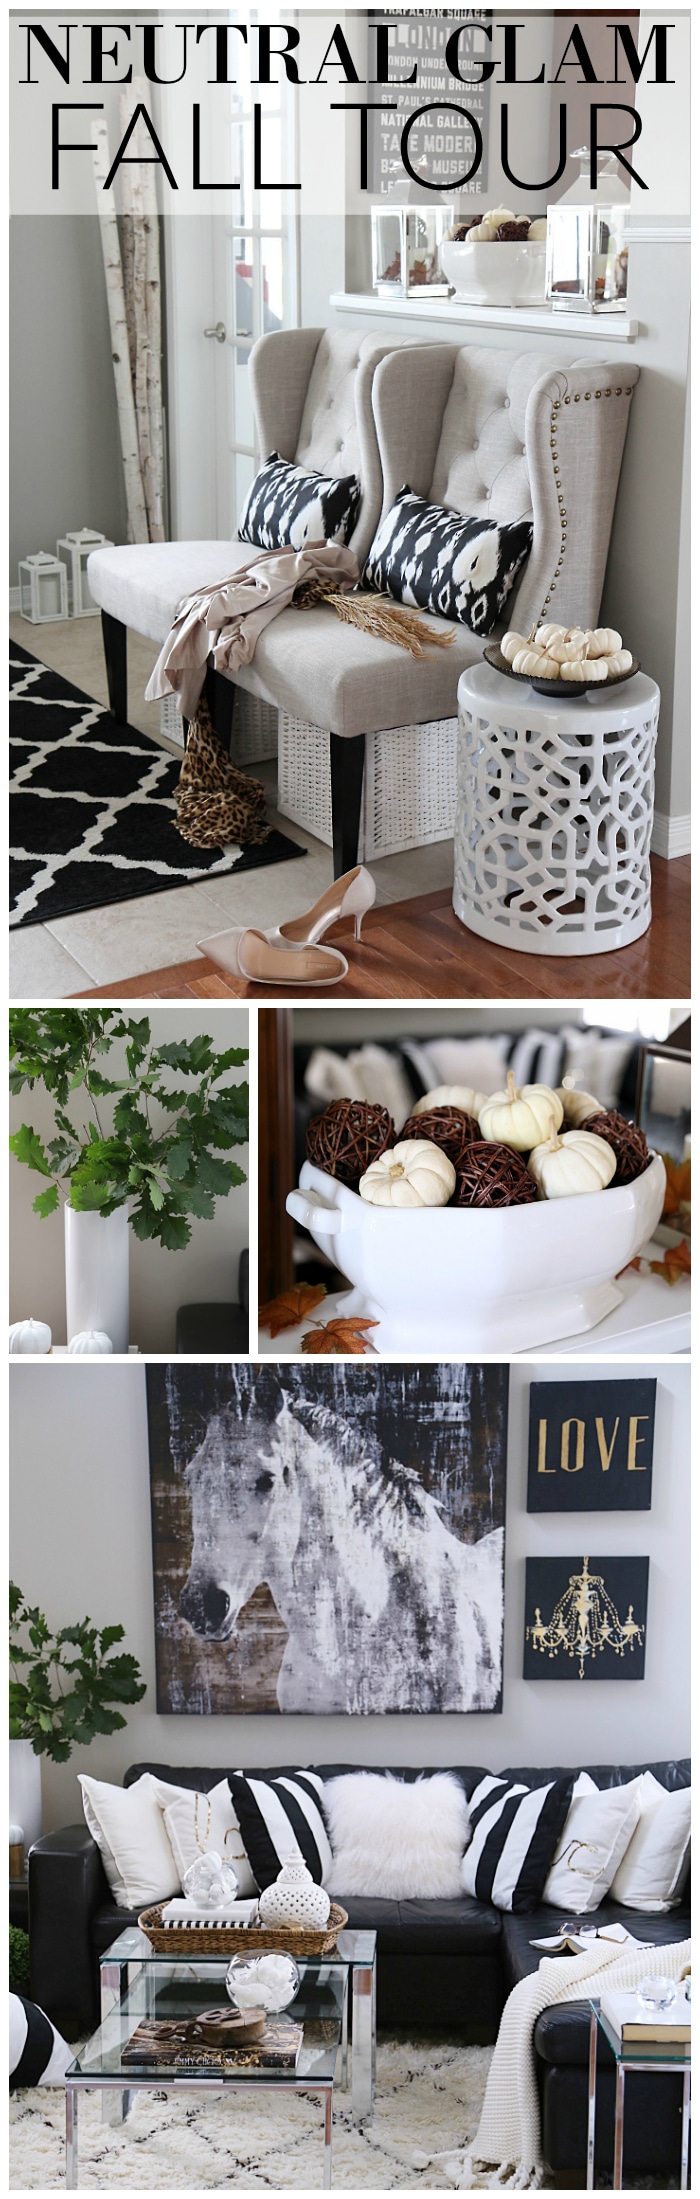 See this design blogger's neutral glam fall home tour with simple, easy and cozy fall decorating ideas for a neutral color scheme.